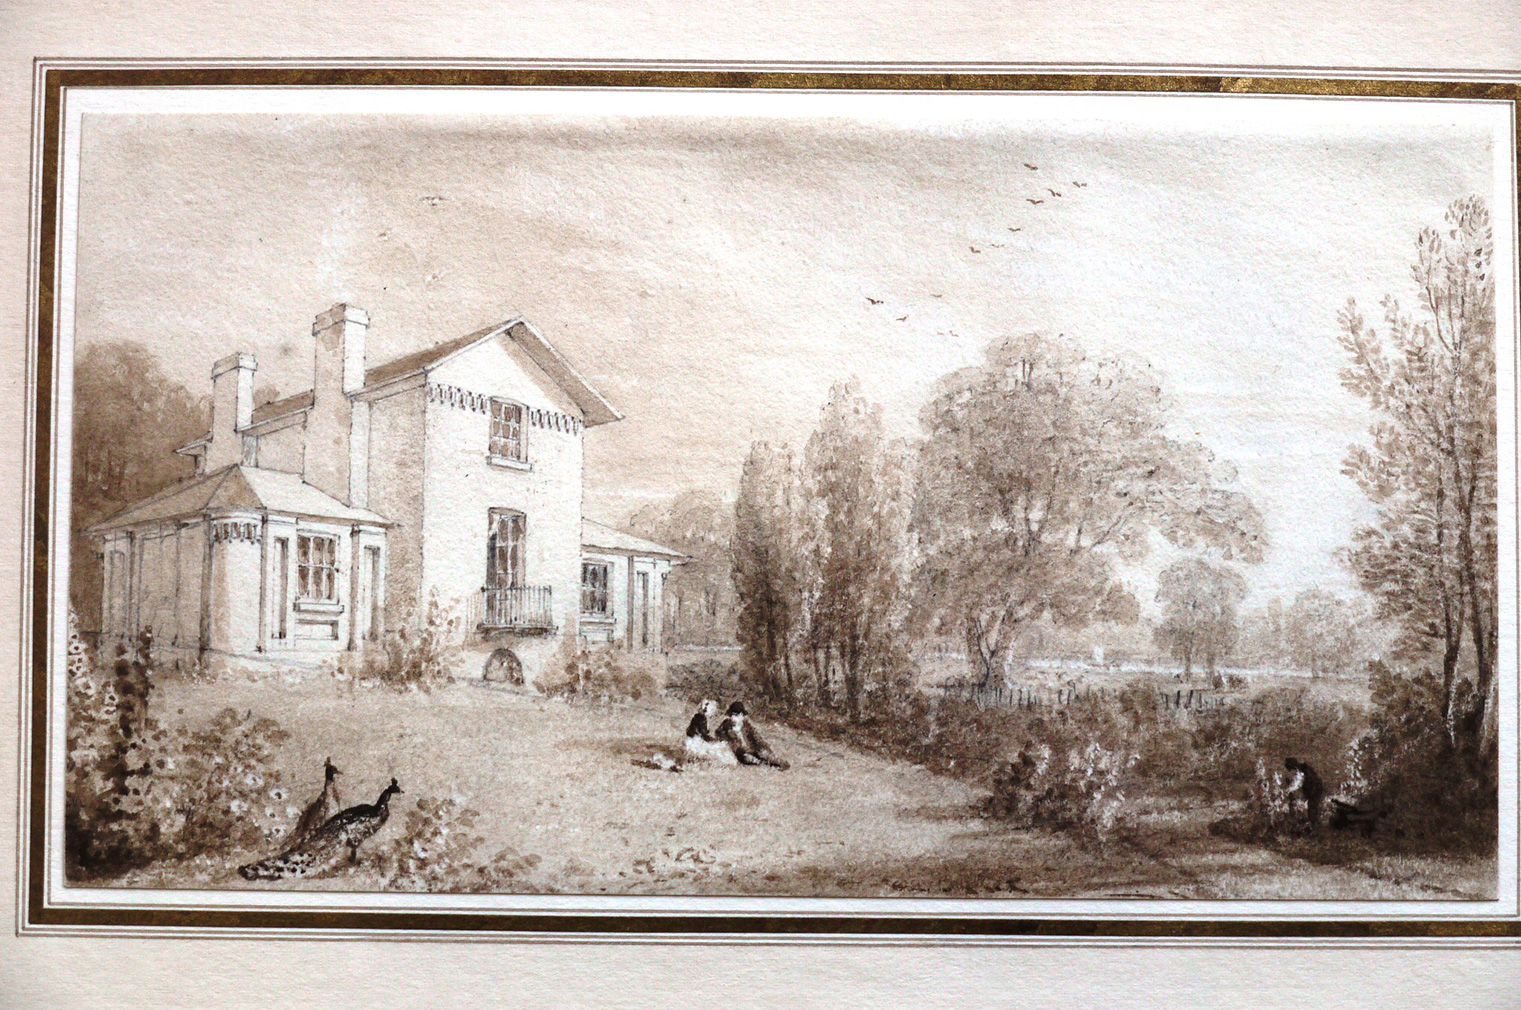 JMW Turner's former home, Sandycombe Lodge in London